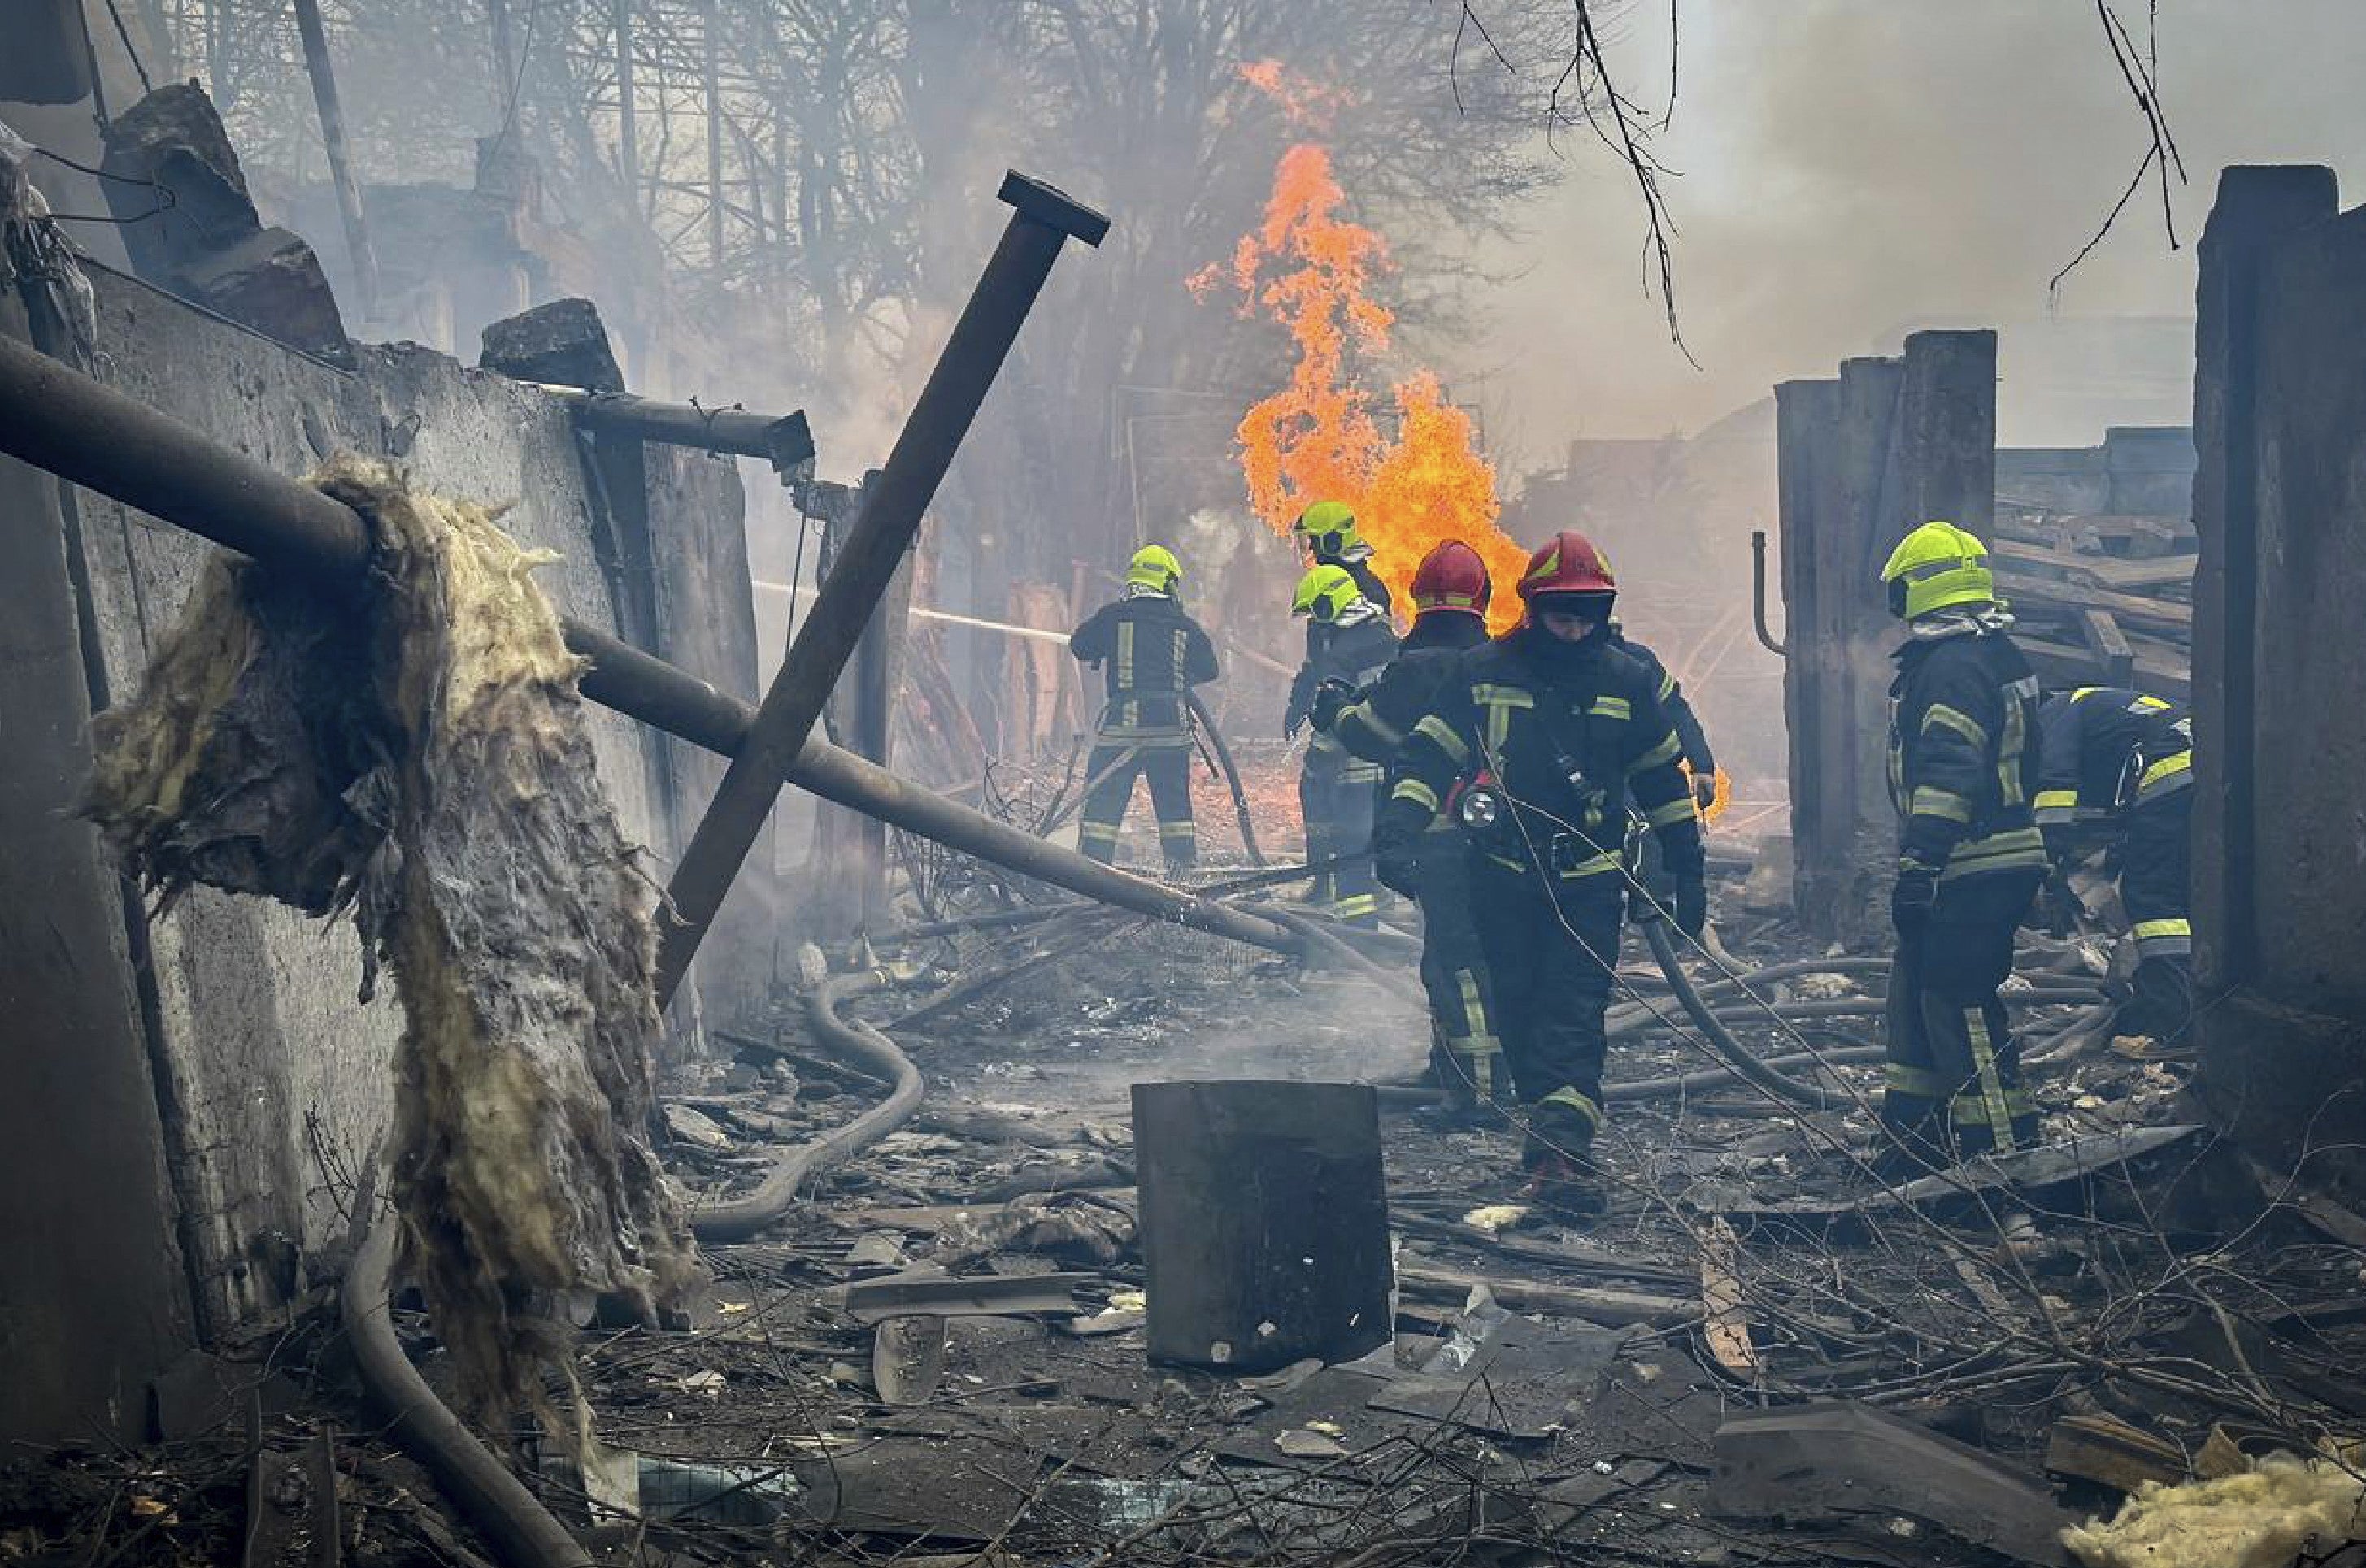 Rescuers extinguishing a fire at the site of the missile attack in Odesa on Friday